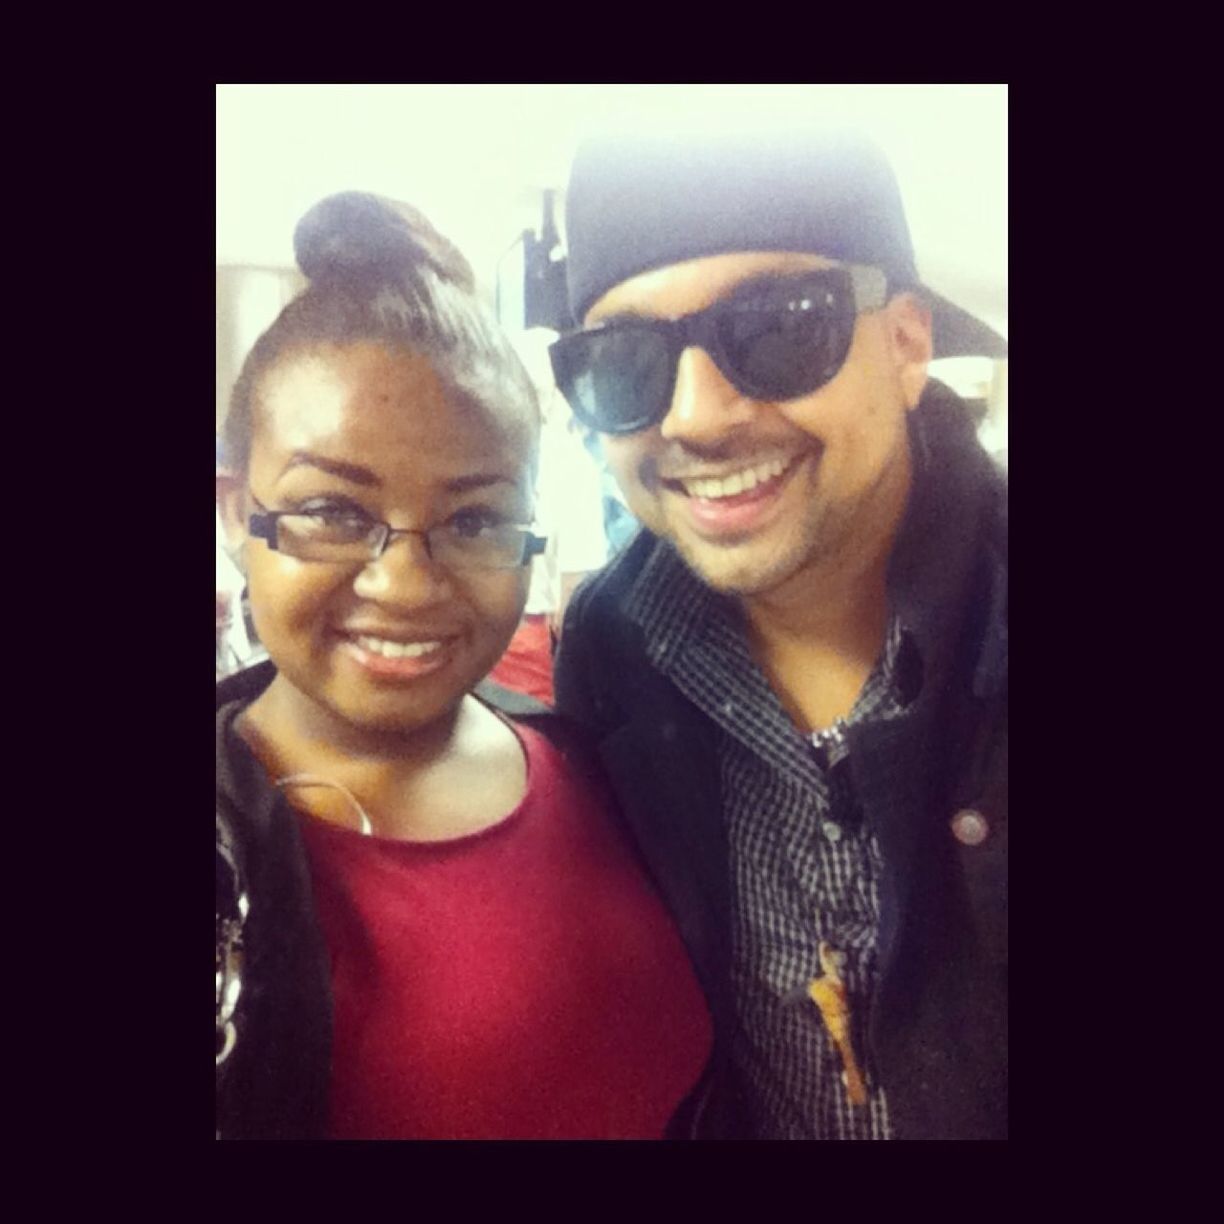 With sean paul